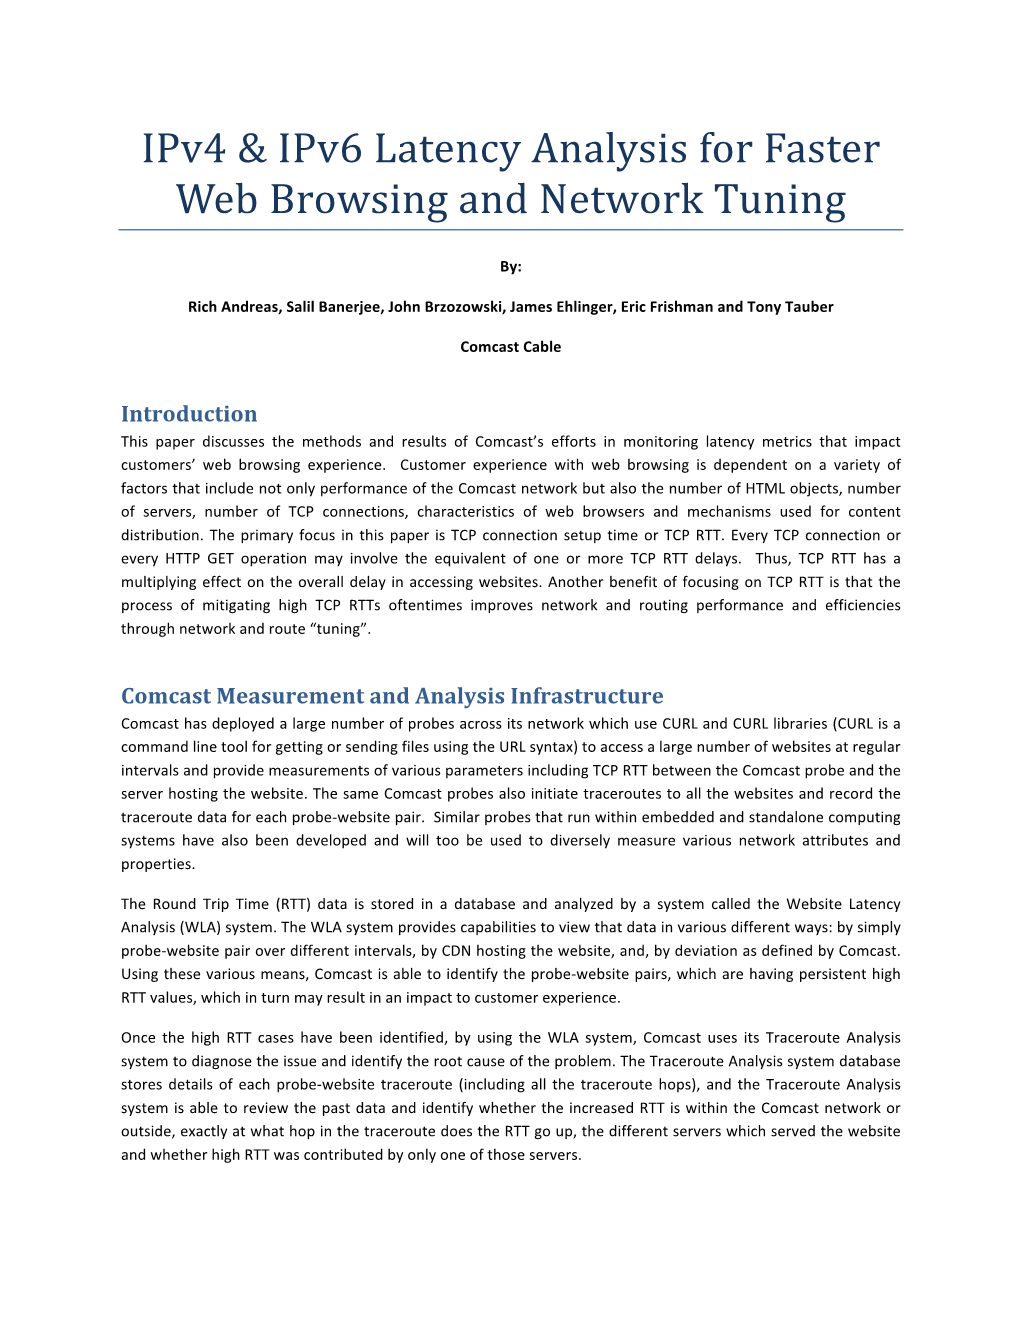 Ipv4 & Ipv6 Latency Analysis for Faster Web Browsing and Network